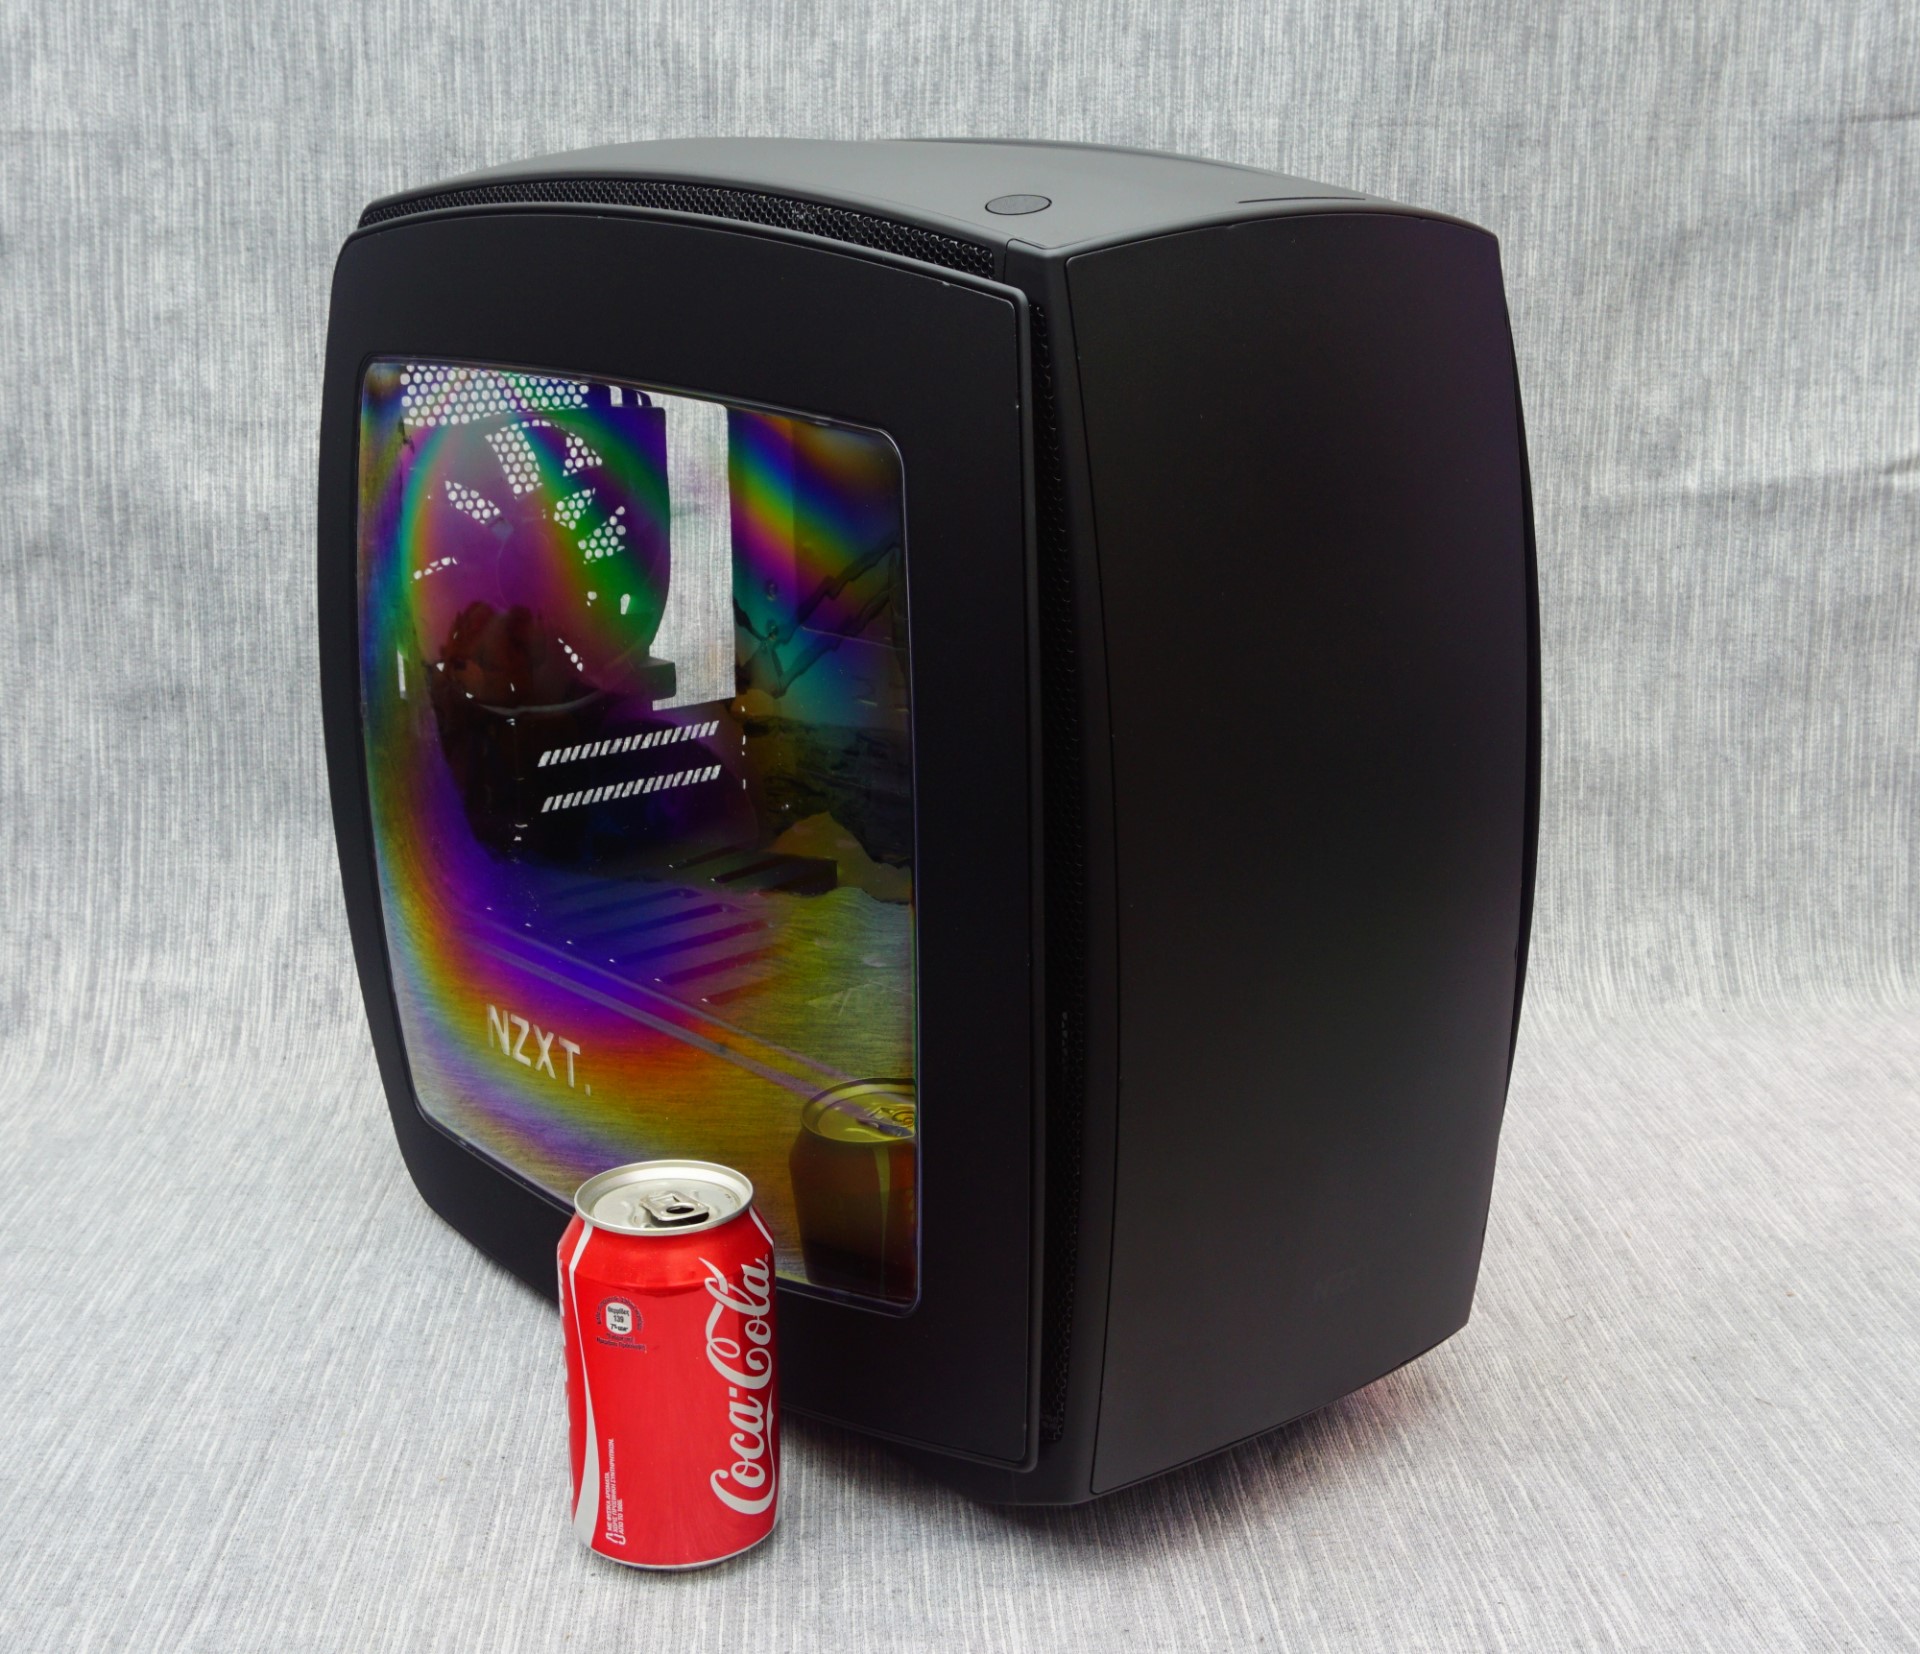 The Exterior of the NZXT Manta - The NZXT Manta mITX Case Review